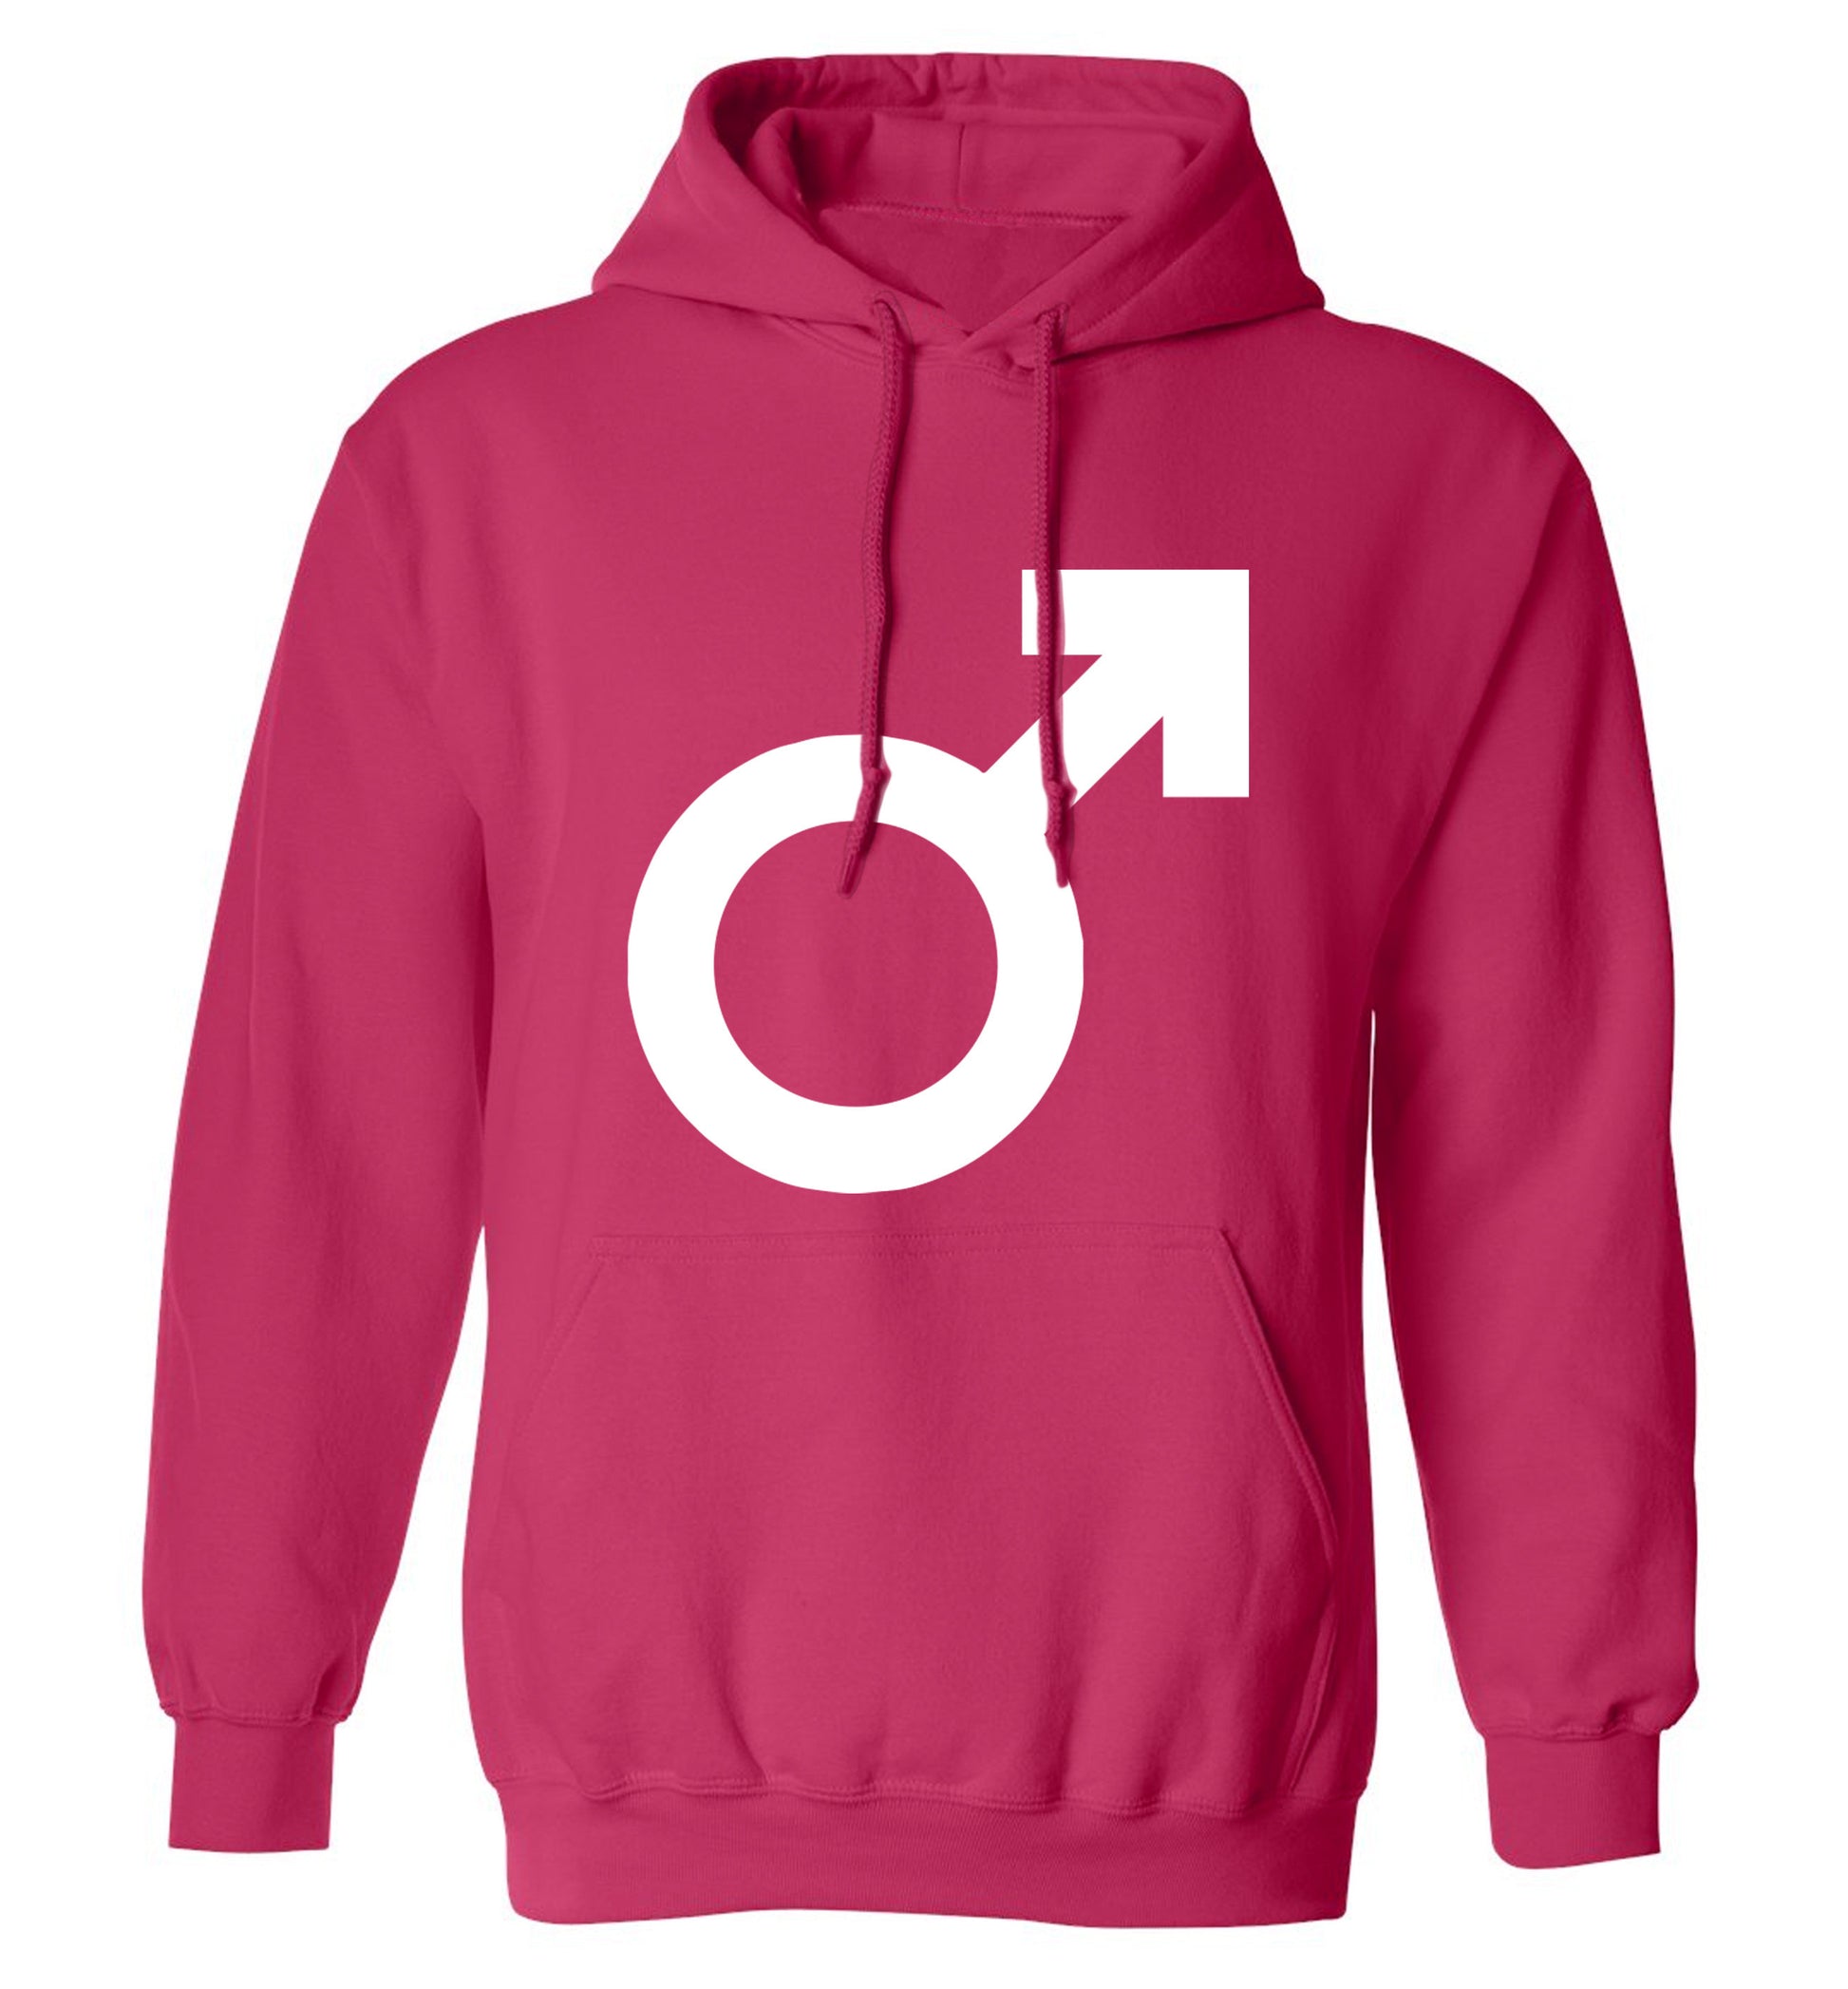 Male symbol large adults unisex pink hoodie 2XL